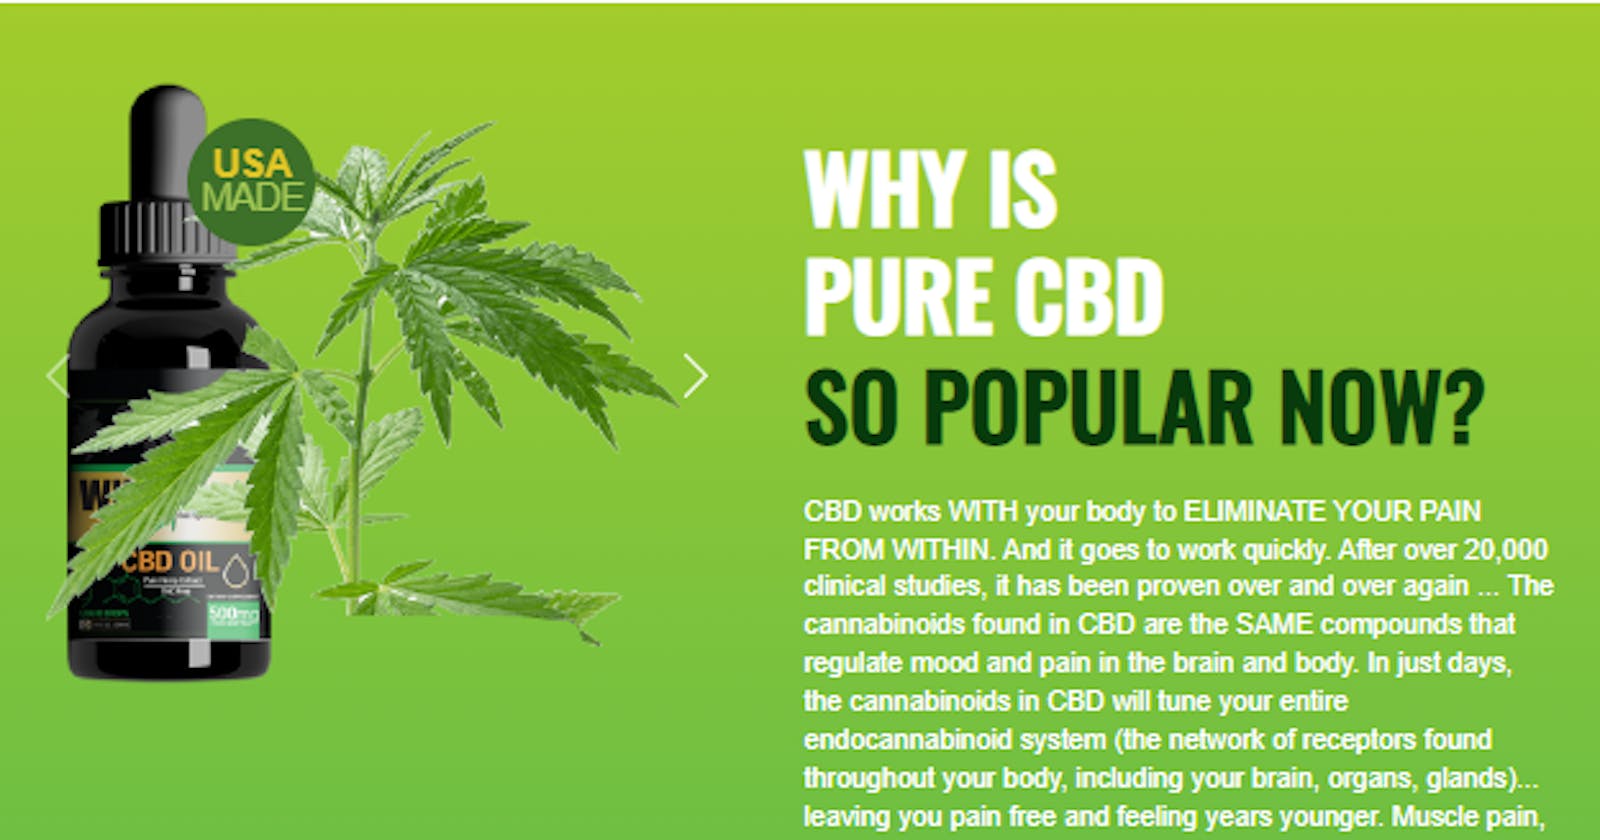 The Benefits of WholeLeaf CBD Oil: Natural Healing at Your Fingertips